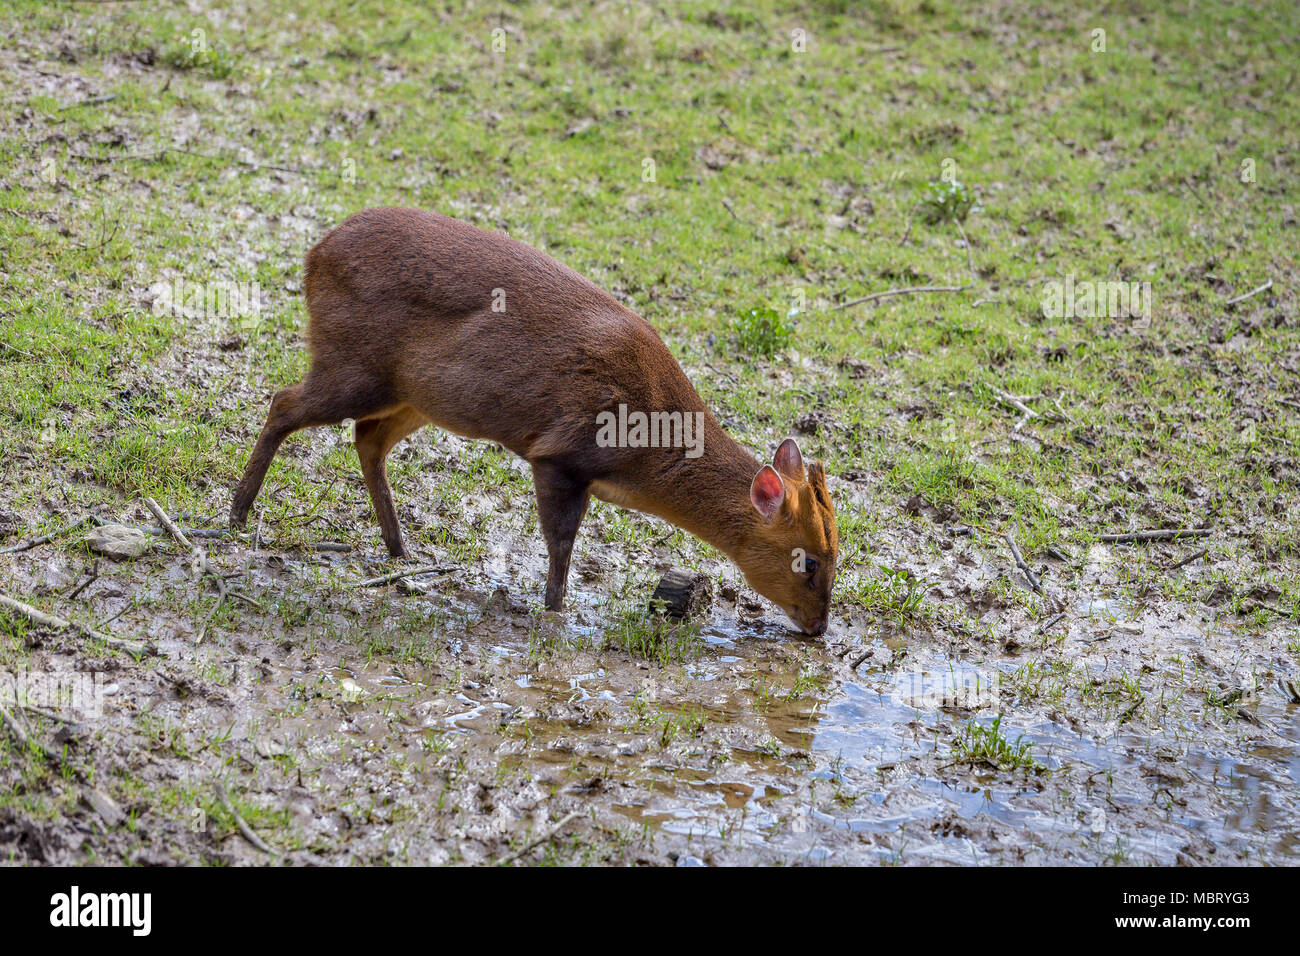 Adult female Reeve's Muntjac Deer (Muntiacus reevesi) at the British Wildlife Centre, Surrey, England. Introduced species Stock Photo